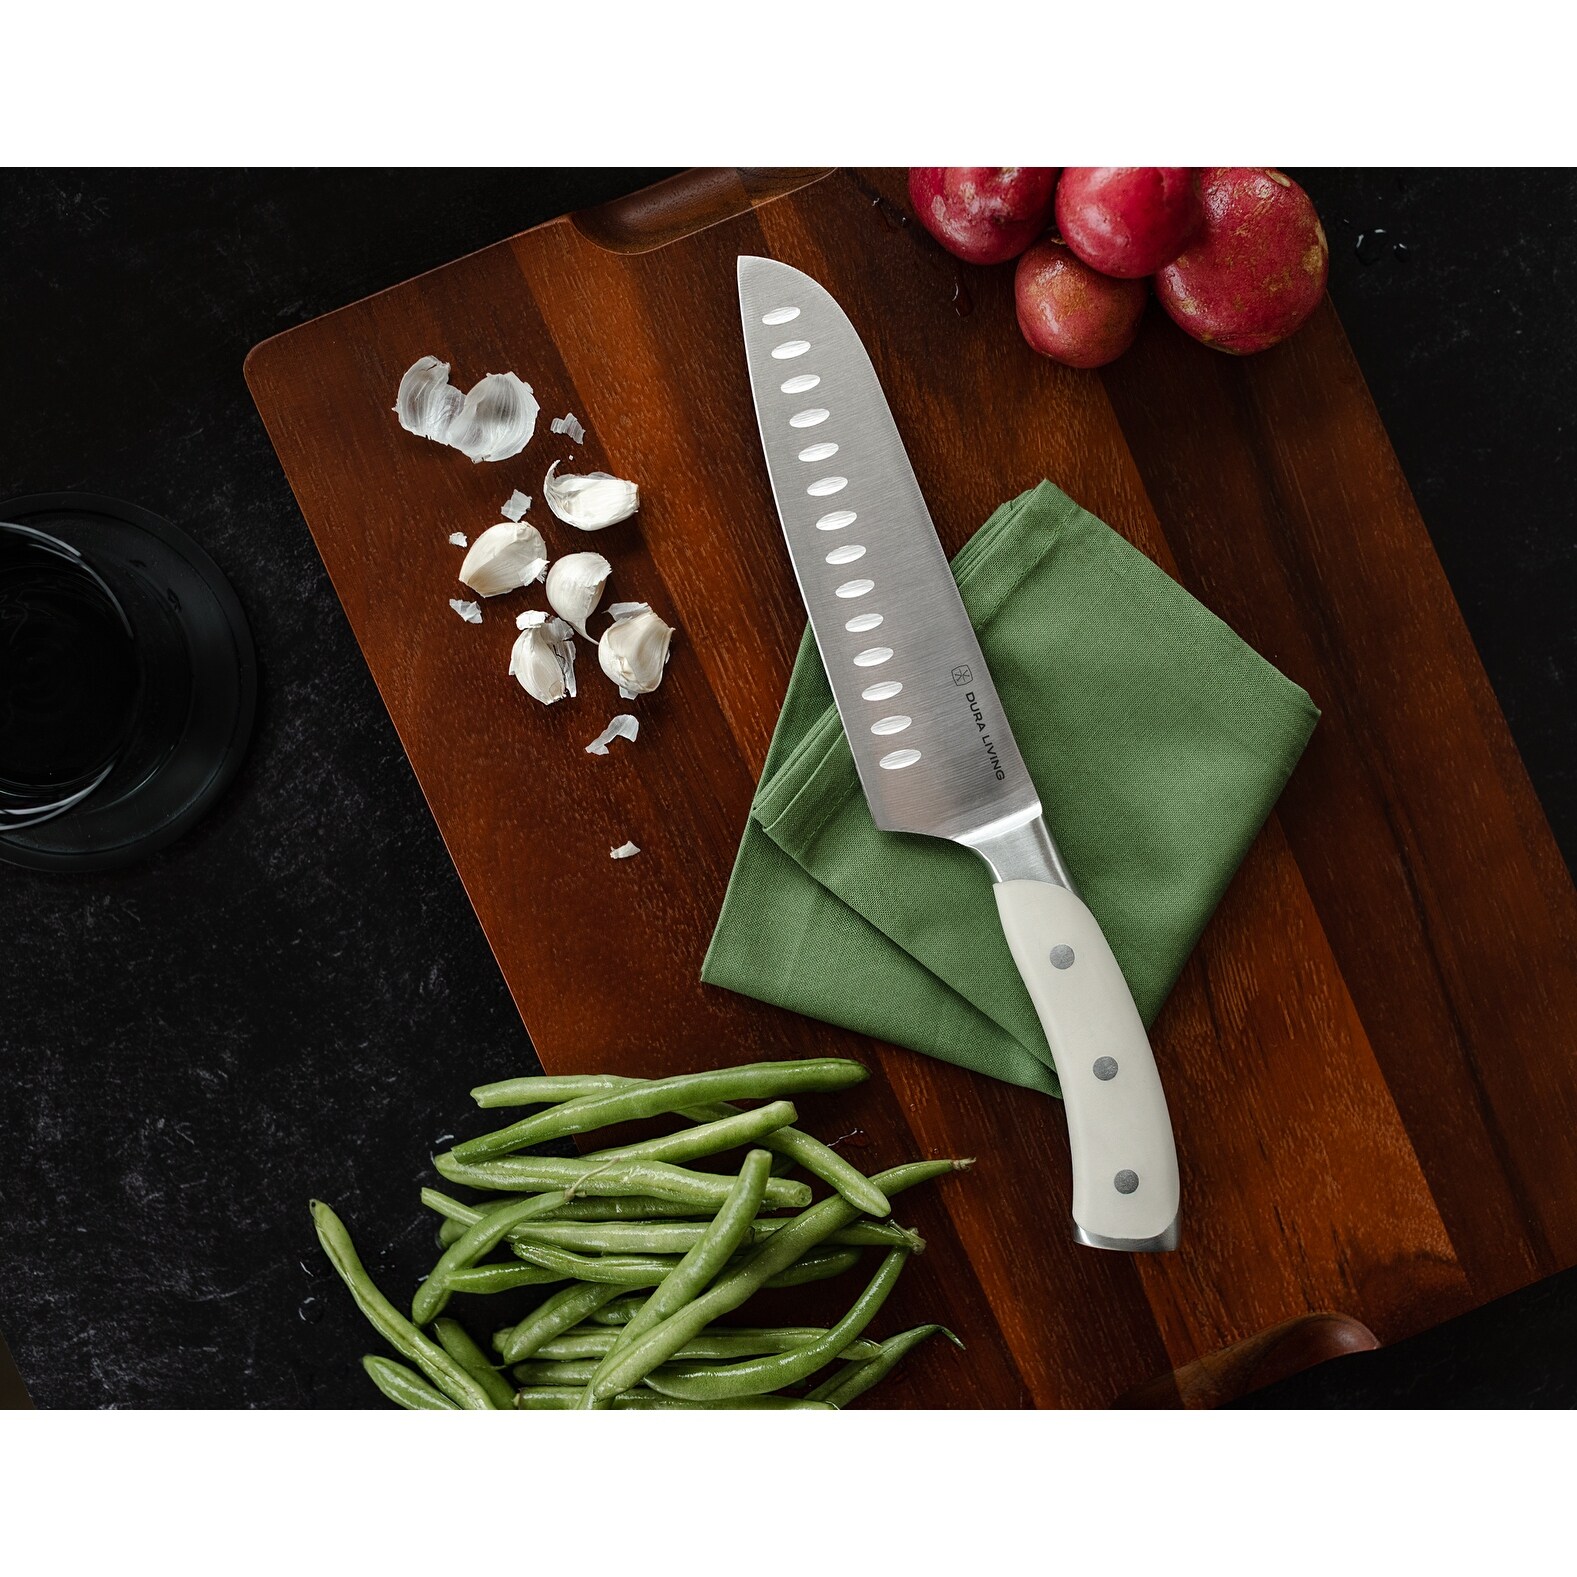 https://ak1.ostkcdn.com/images/products/is/images/direct/b356486fcbaff26eb1bc5a35dc2d03f1dc3f860e/Dura-Living-Elite-7-inch-Santoku-Knife---Forged-High-Carbon-German-Stainless-Steel-Blade%2C-Black.jpg